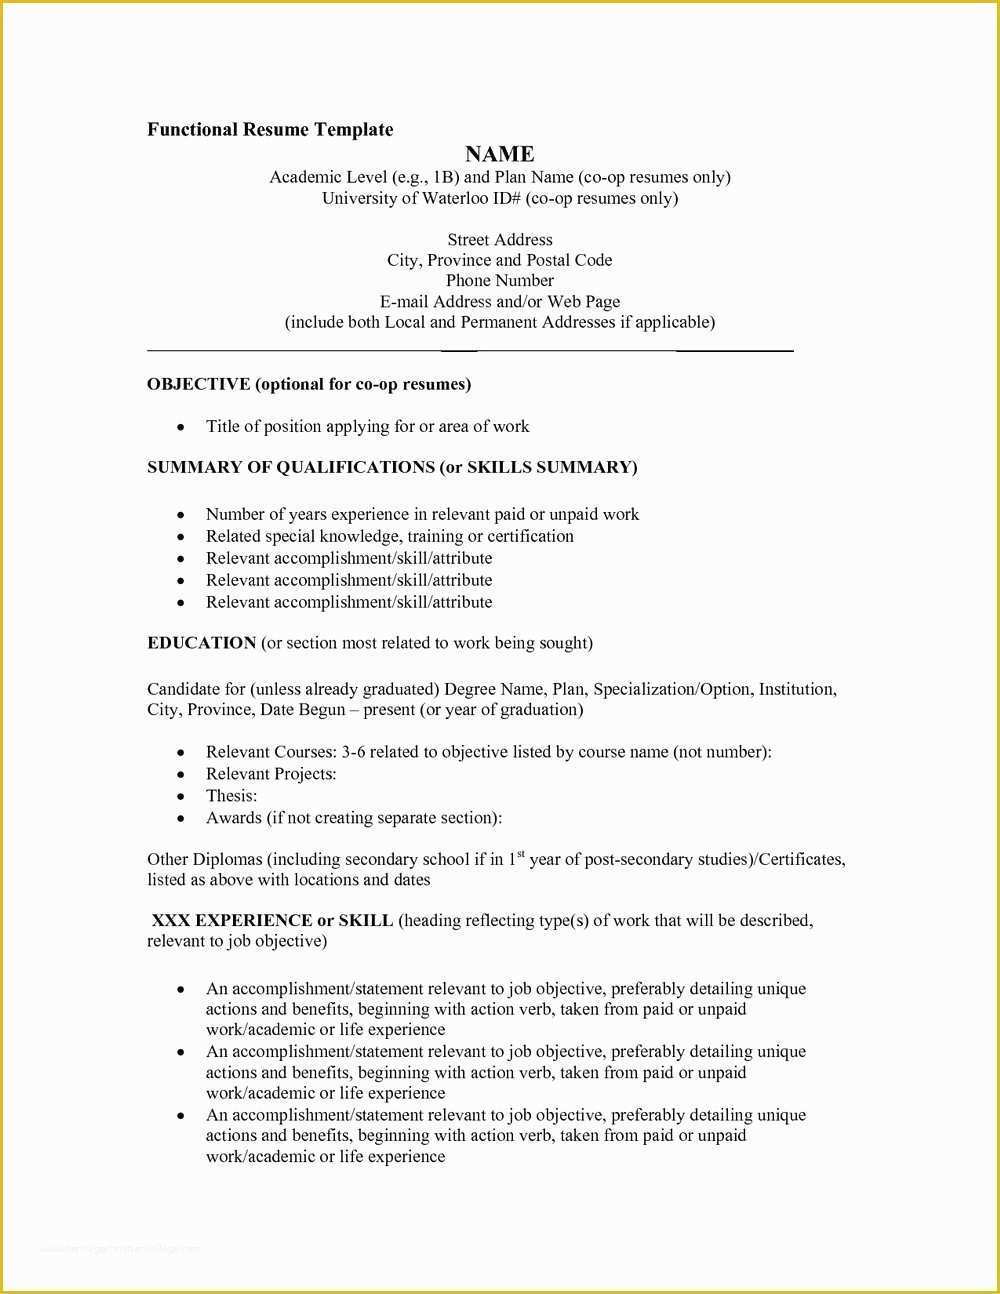 Functional Resume Template Free Download Of Functional Resume Template Free Download Resumes 297